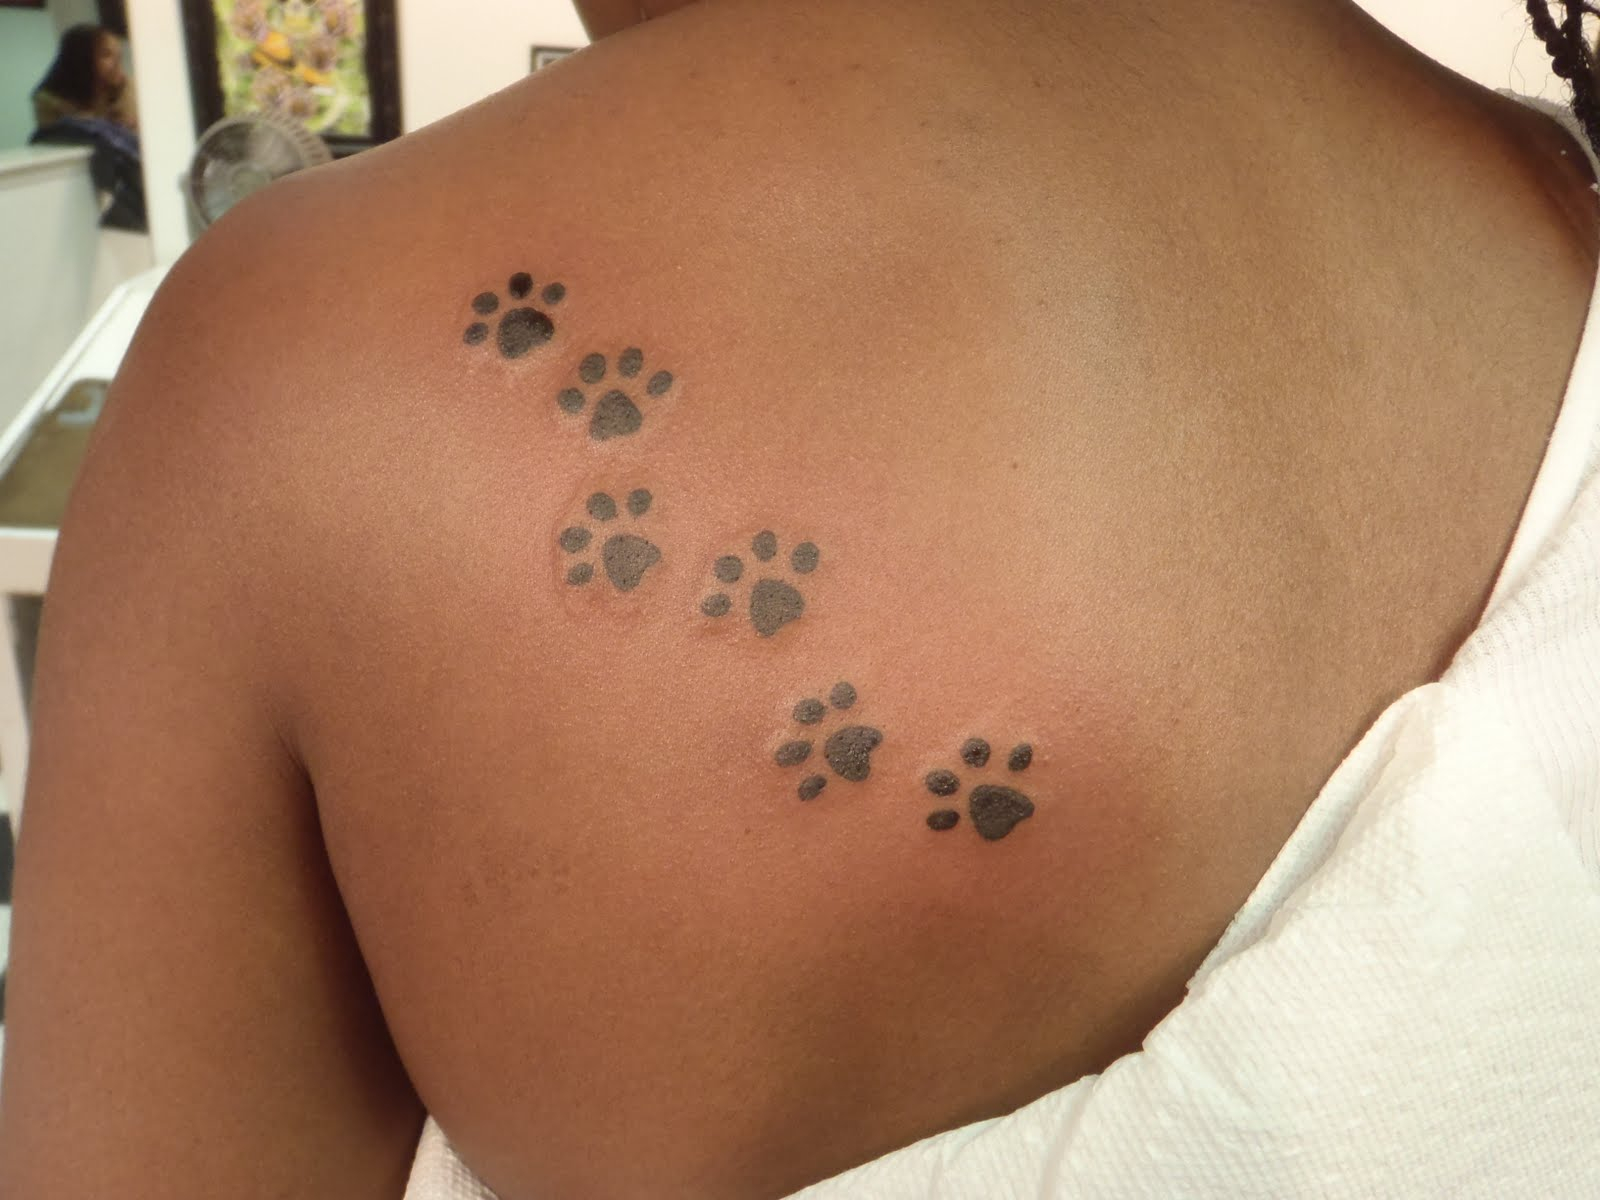 Paw Print Tattoos Designs Ideas And Meaning Tattoos For You throughout sizing 1600 X 1200